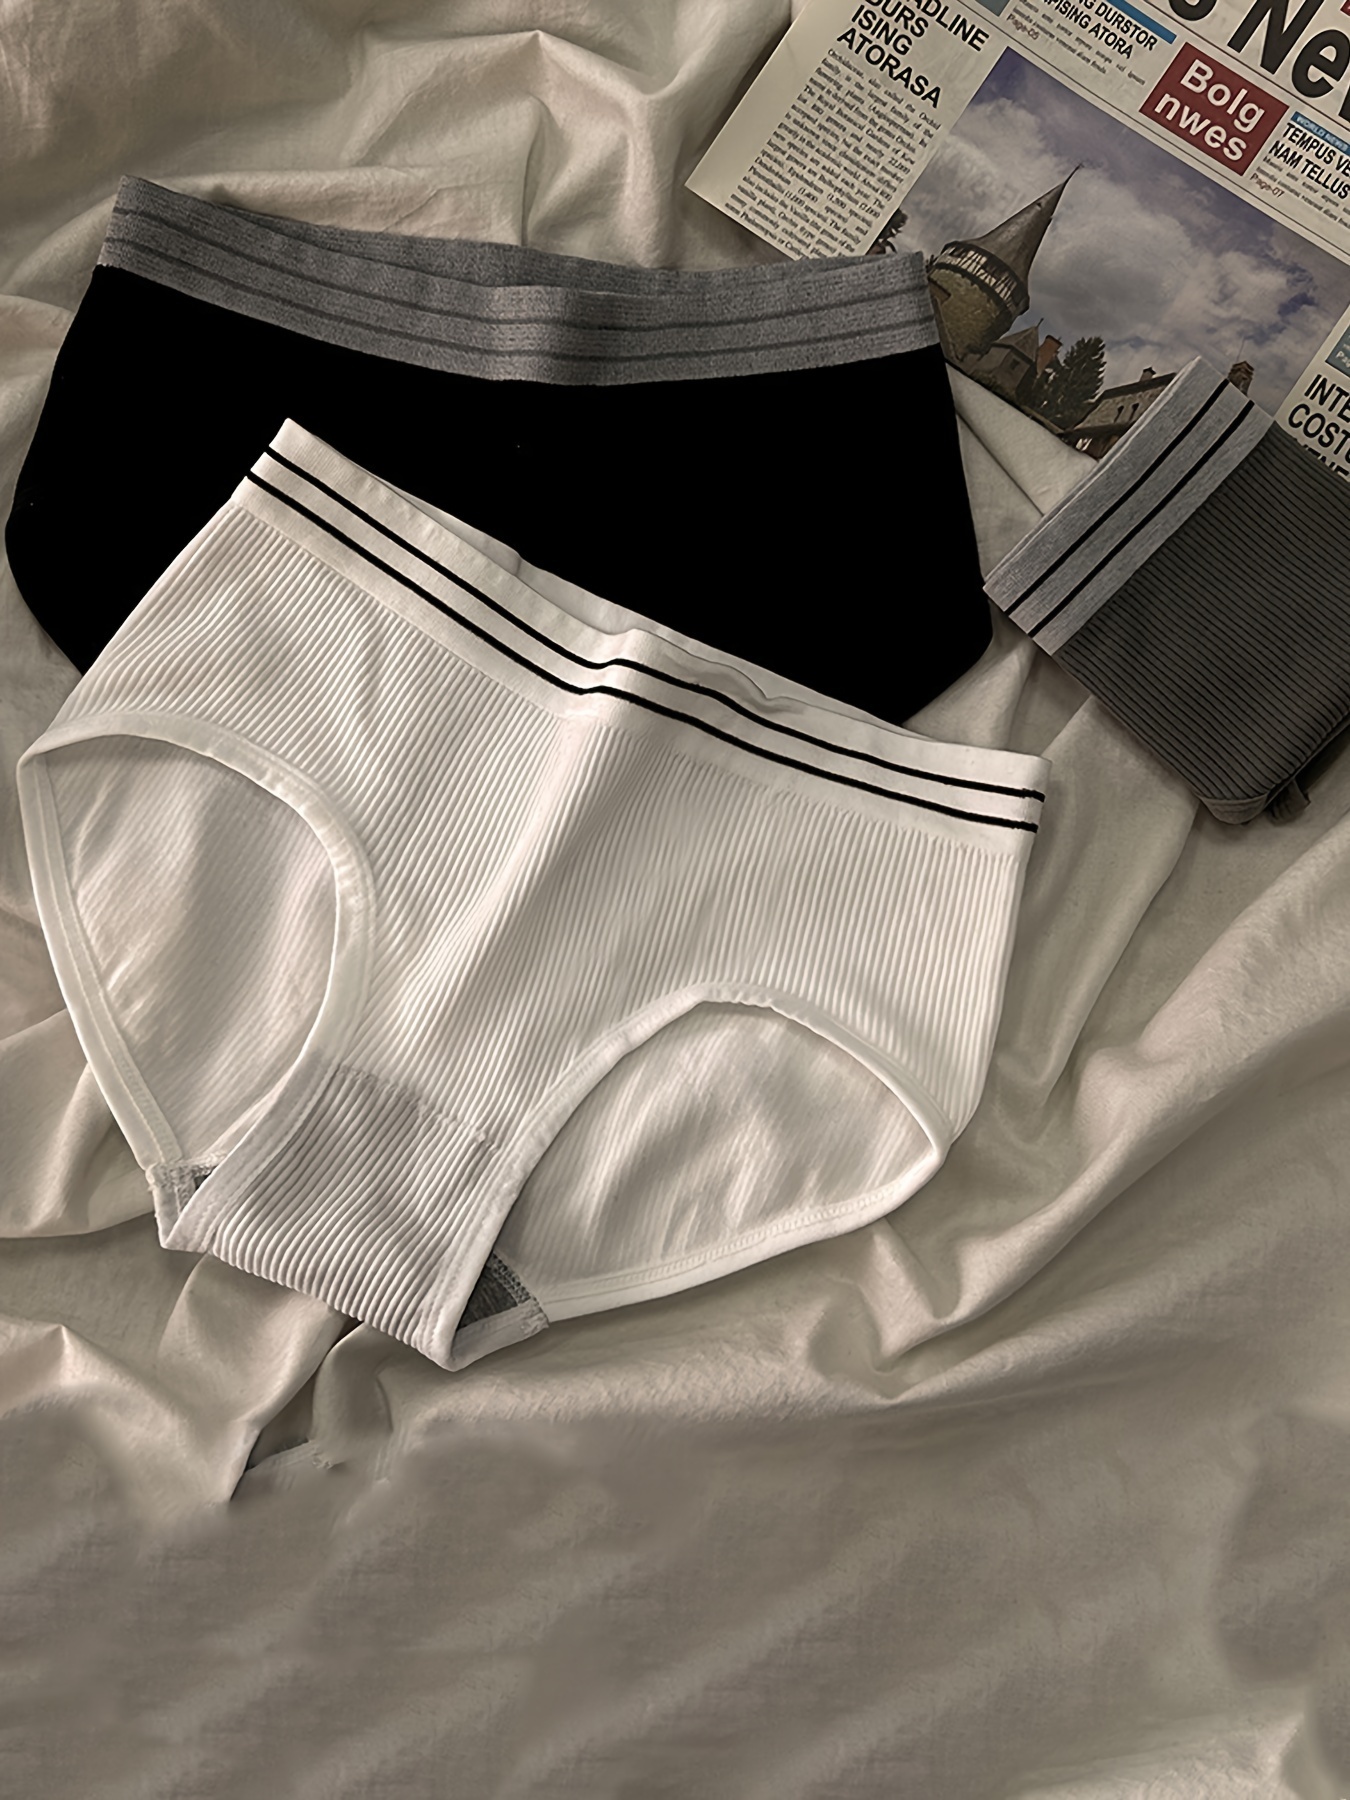 Men's Briefs: Sporty and Sophisticated Styles